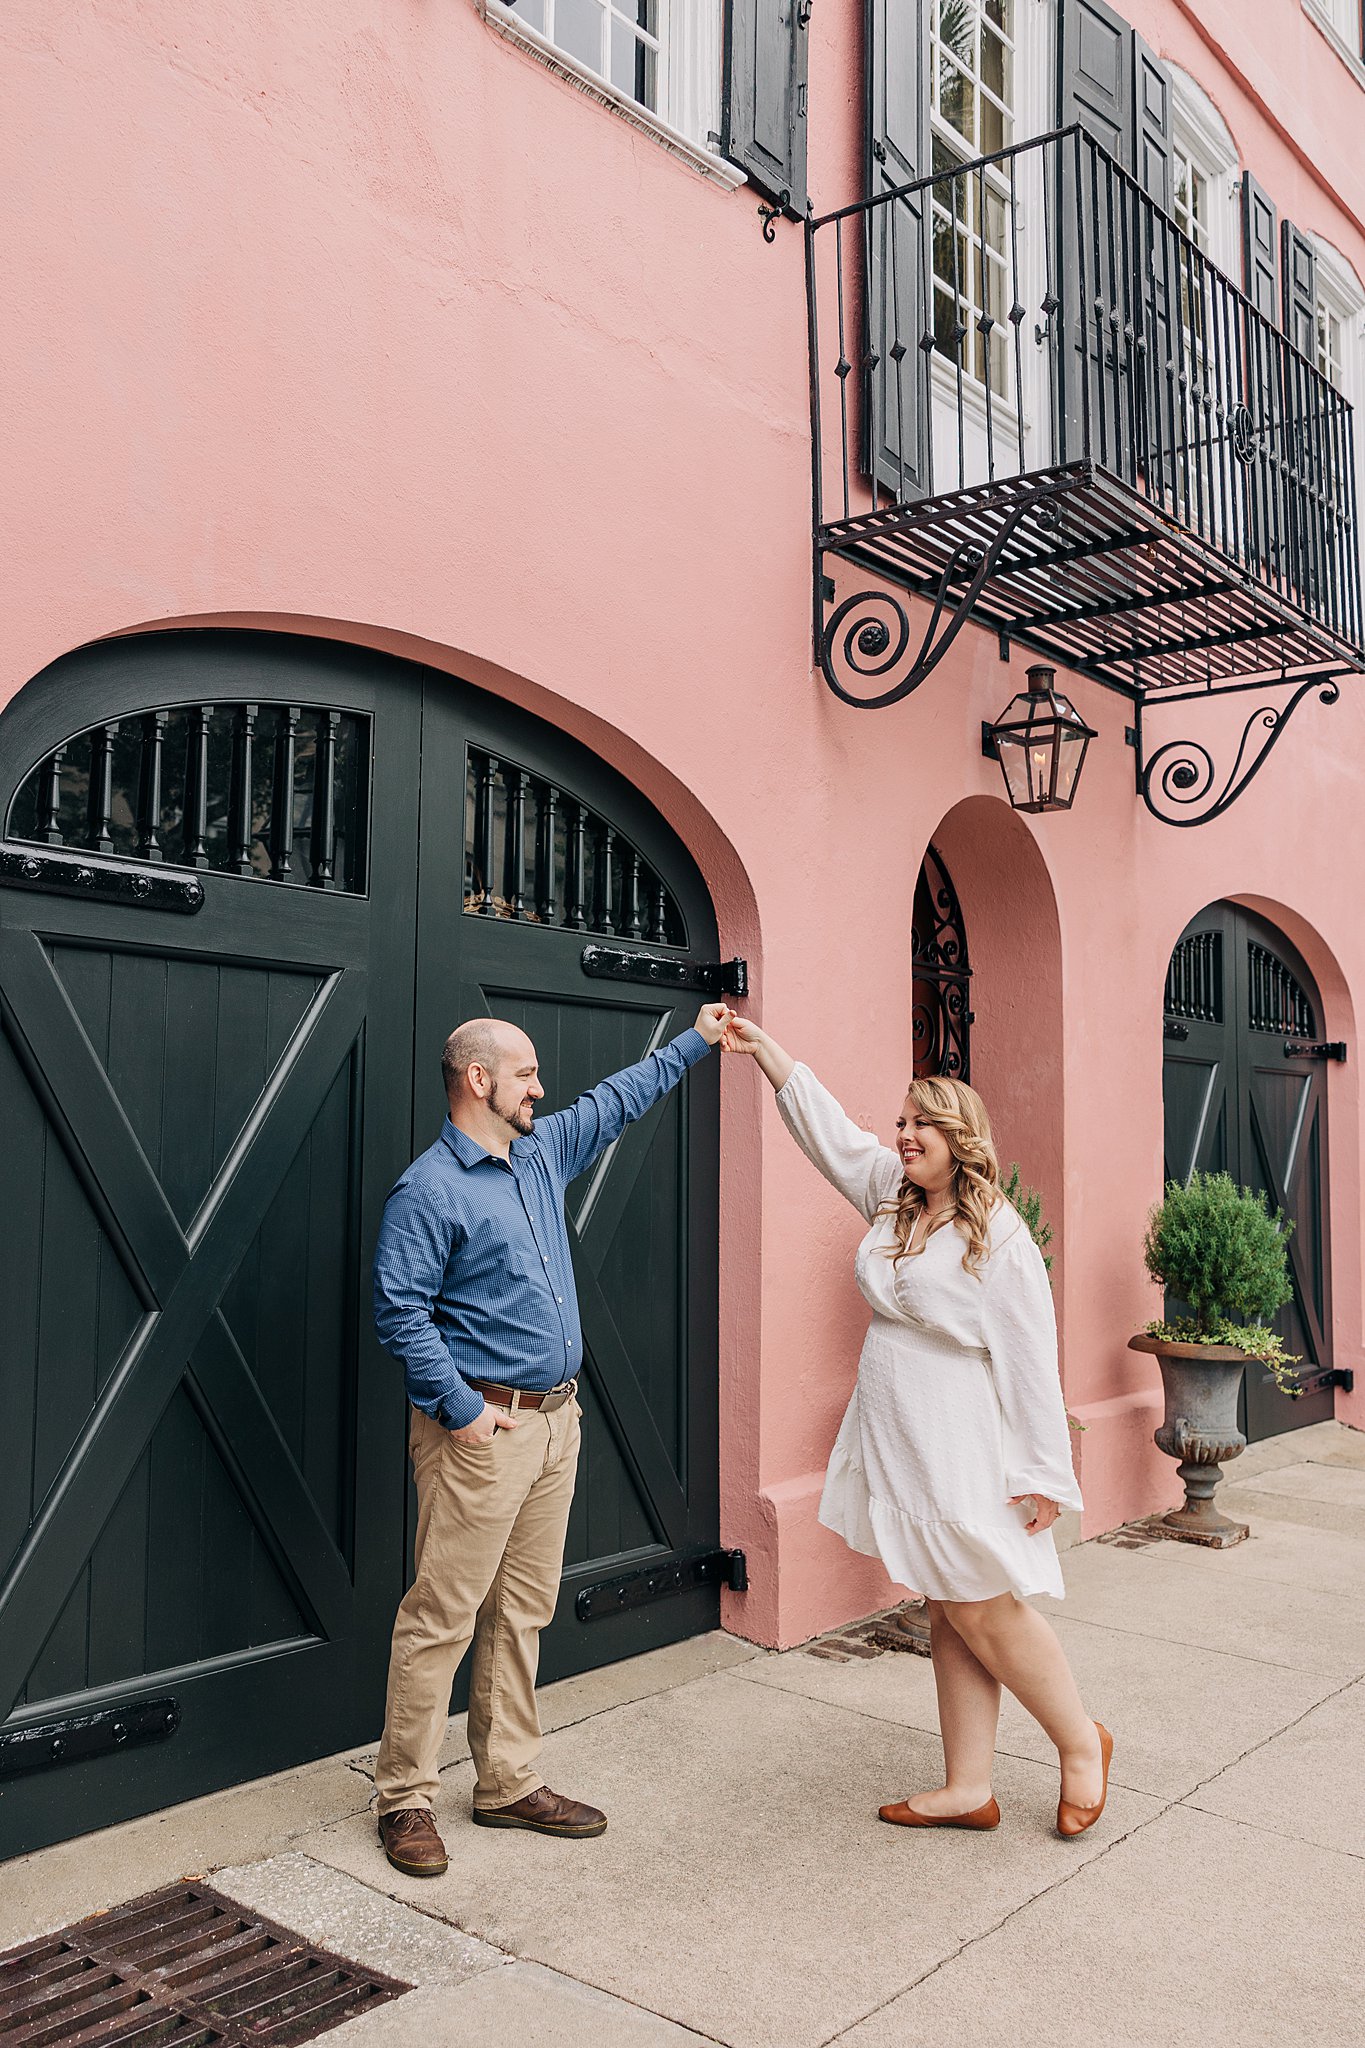 A newly engaged couple dance in an alley by a pink building in front of large black wooden doors